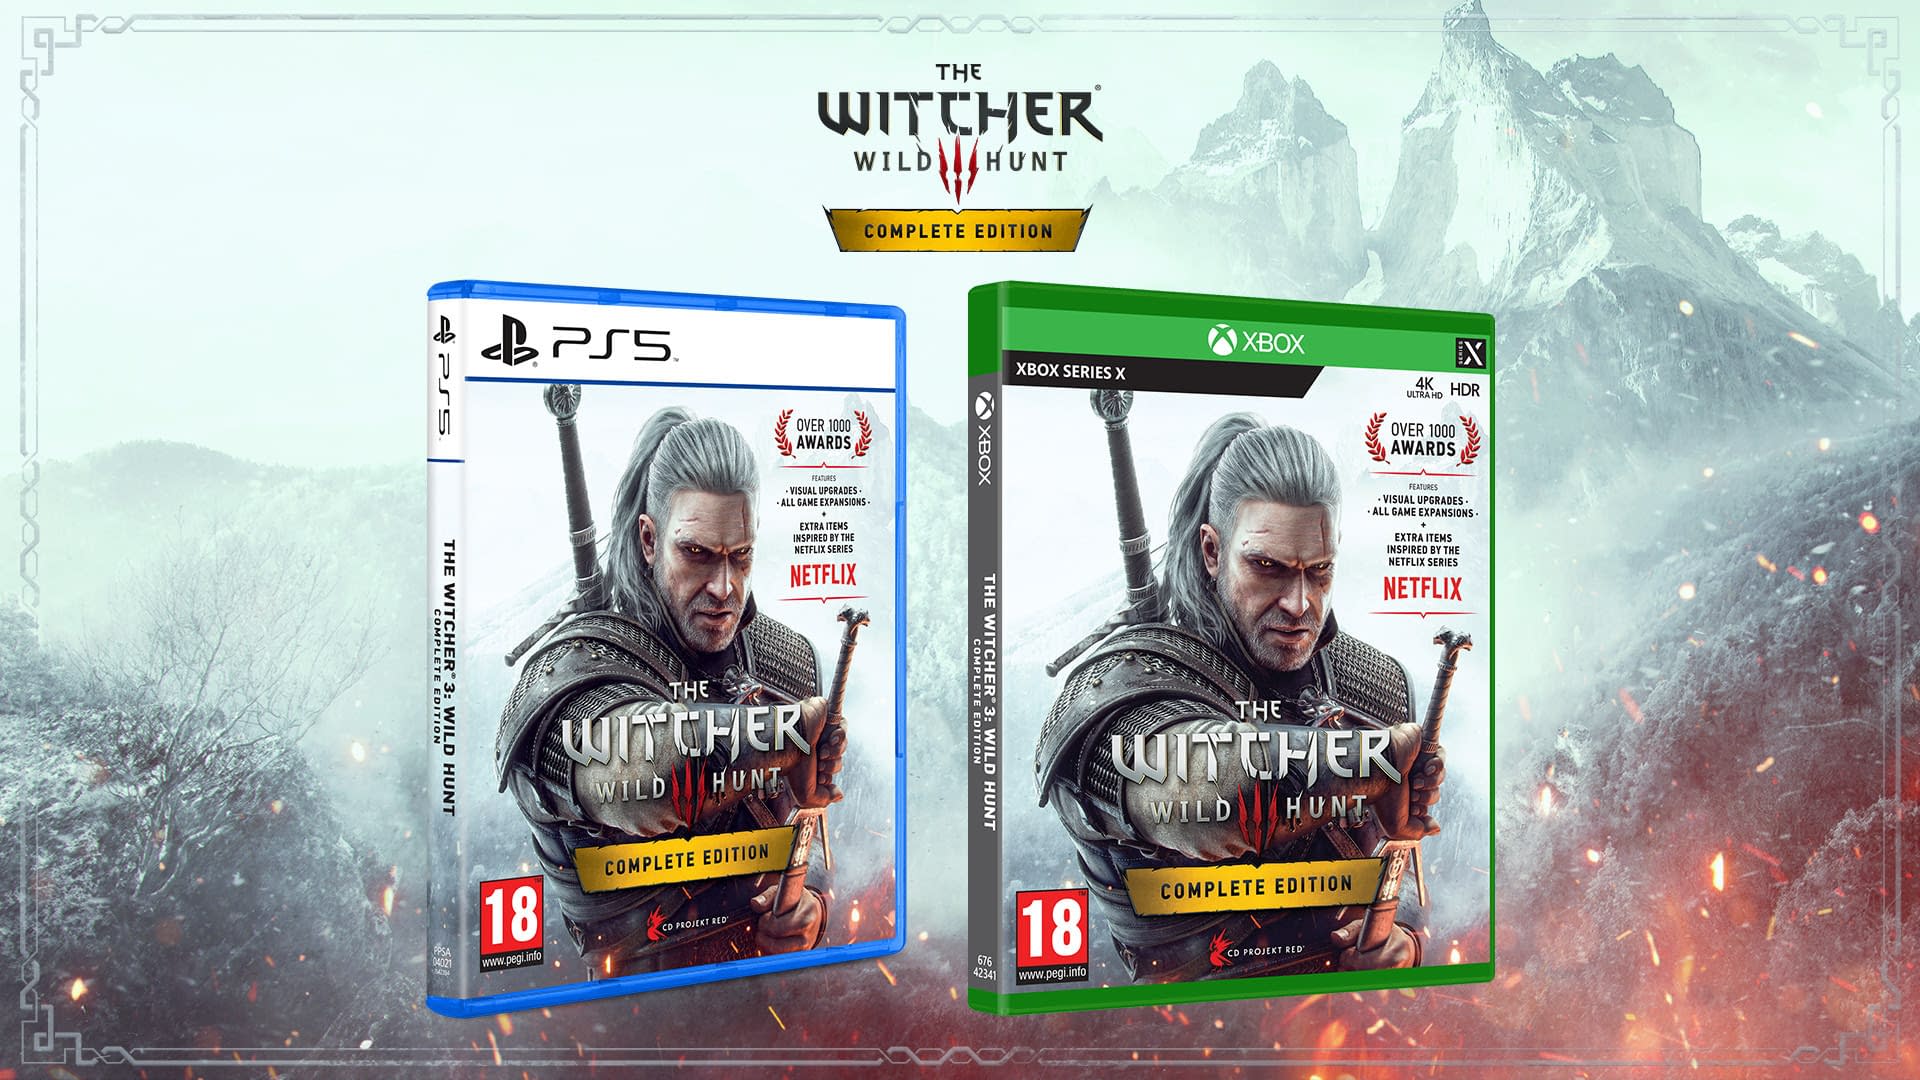 The Witcher 3: Wild Hunt is now available! Get your copy now!